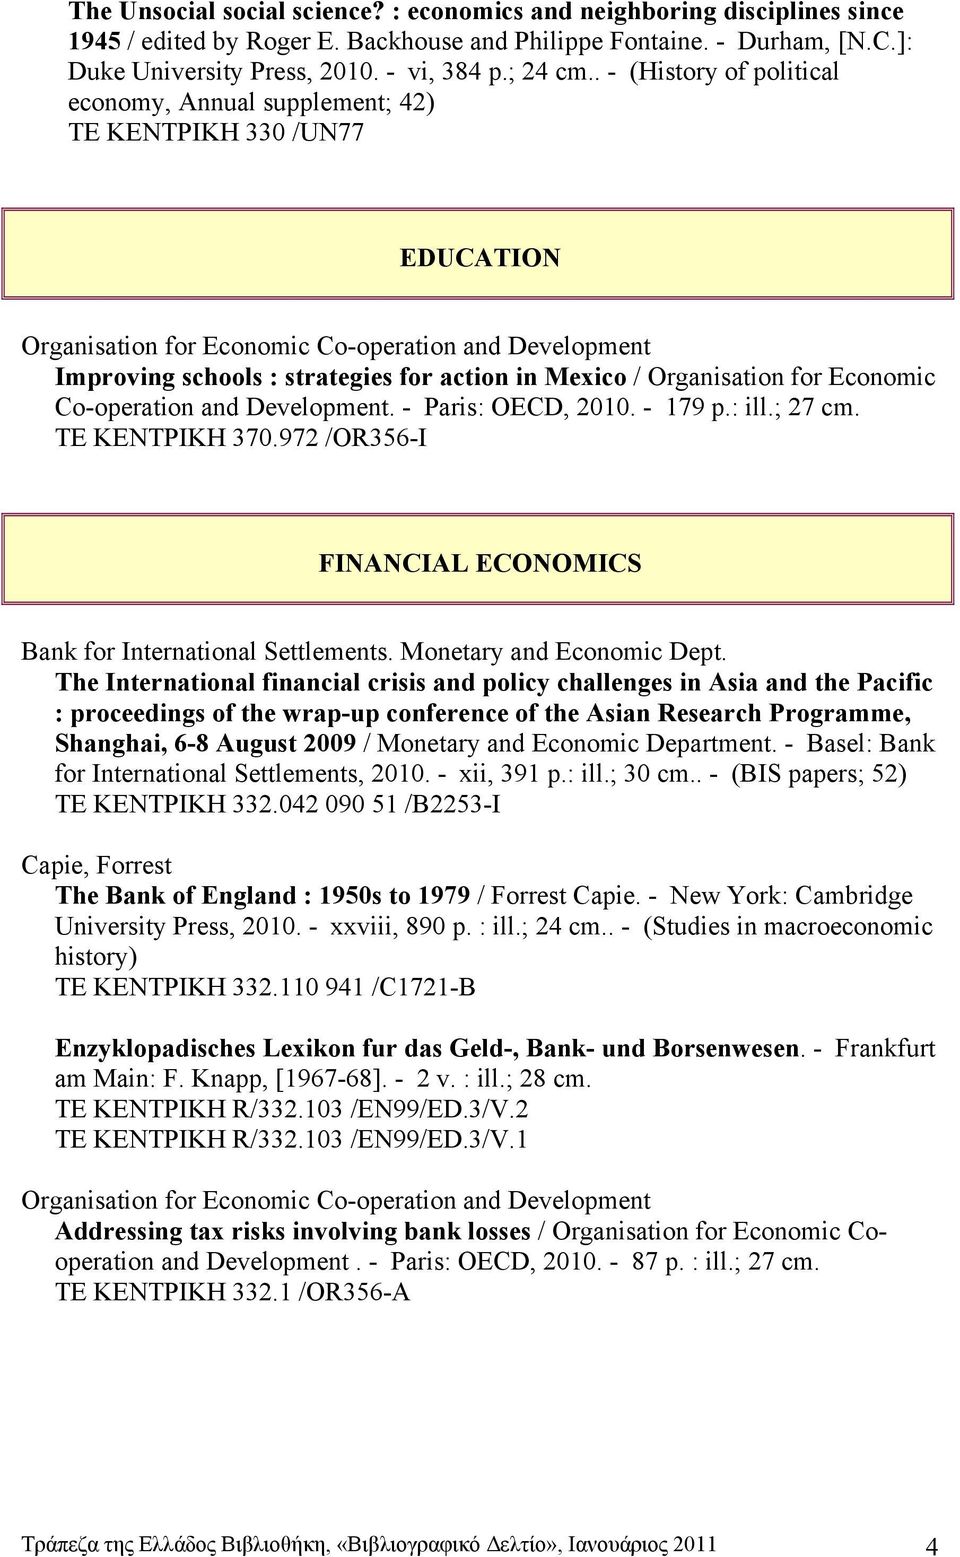 . - (History of political economy, Annual supplement; 42) ΤΕ ΚΕΝΤΡΙΚΗ 330 /UN77 EDUCATION Improving schools : strategies for action in Mexico / Organisation for Economic Co-operation and Development.